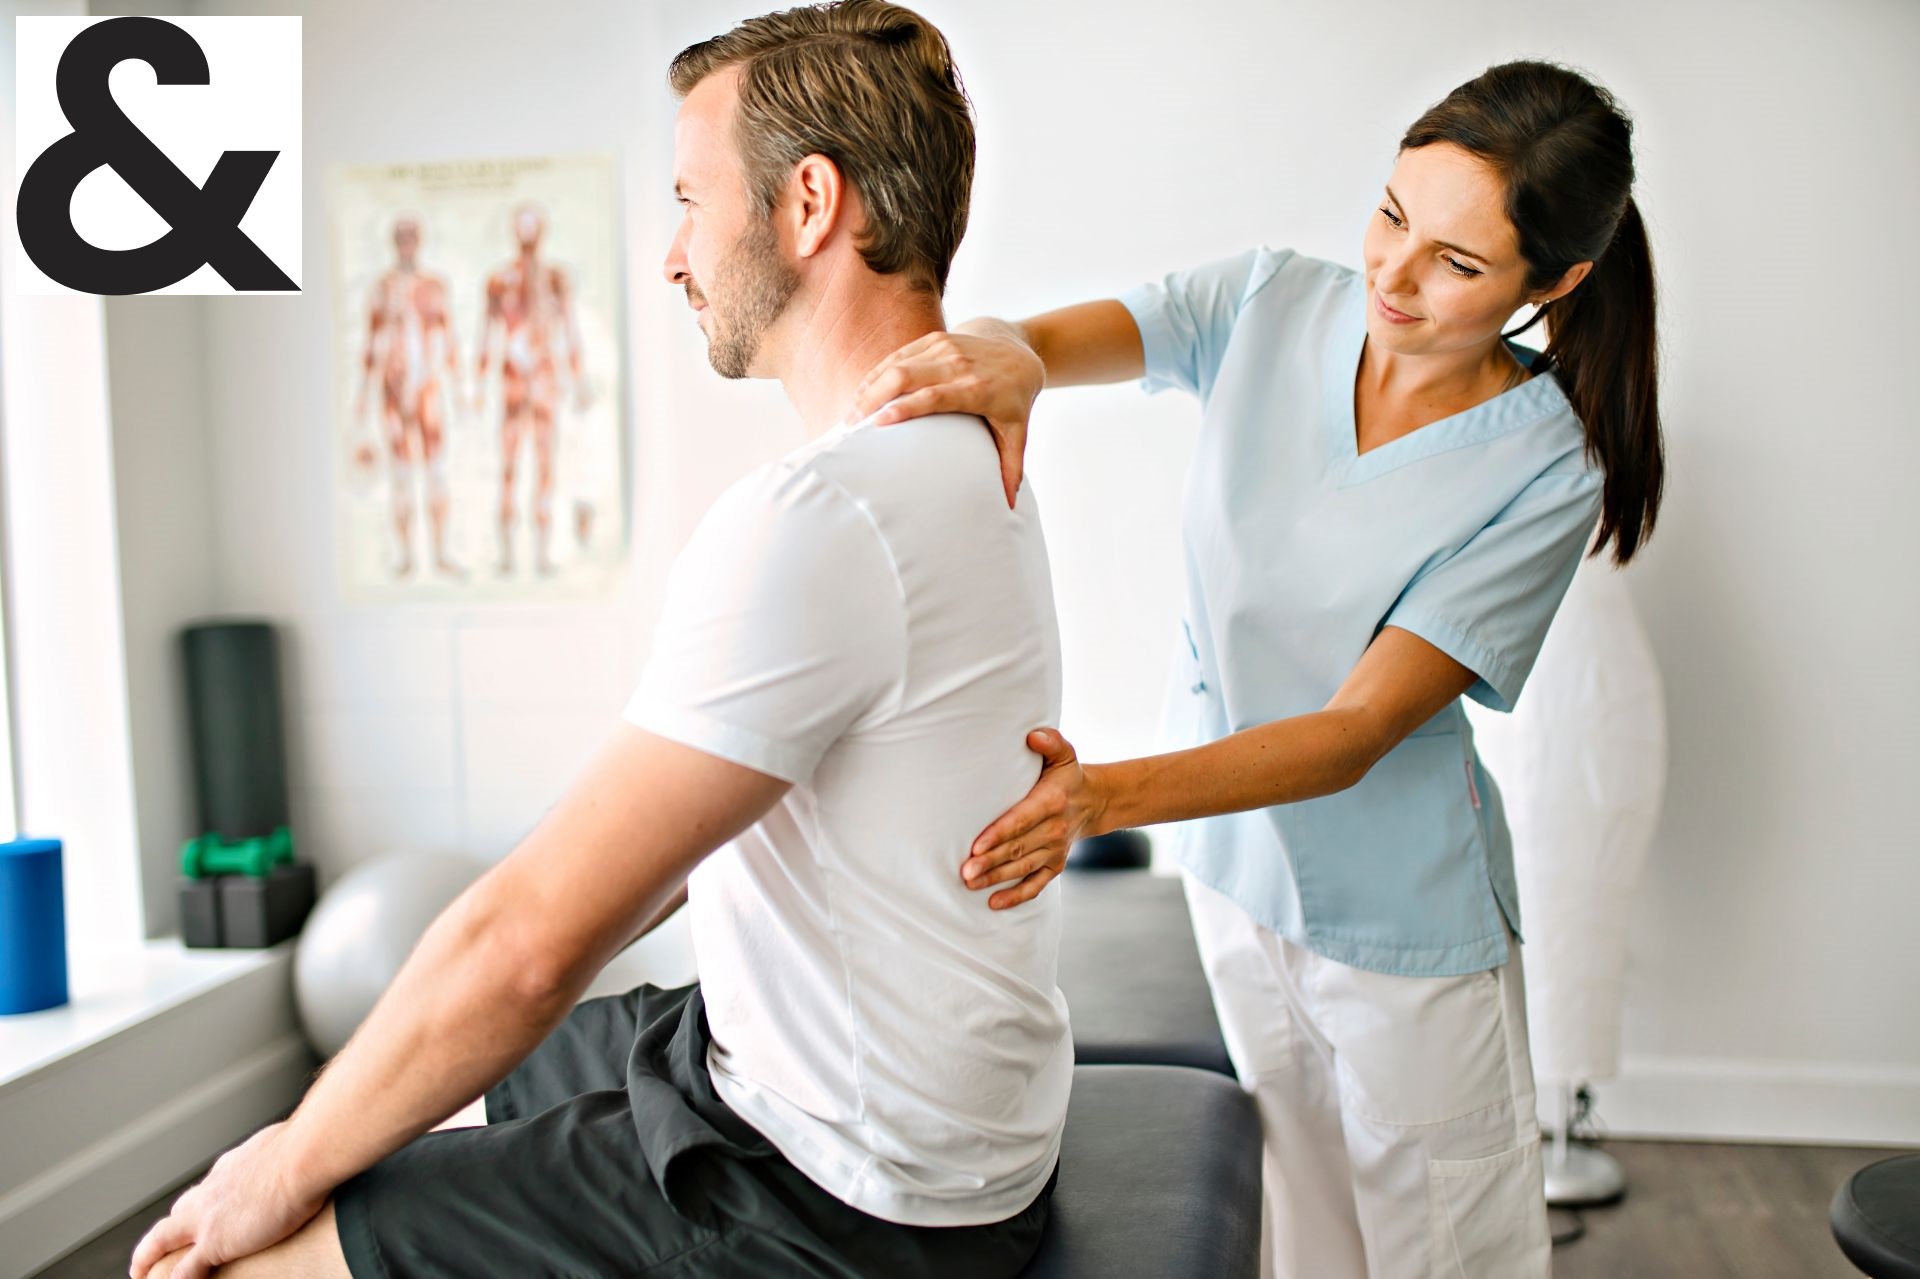 The Science Behind Physiotherapy: How It Works and Why It’s Effective